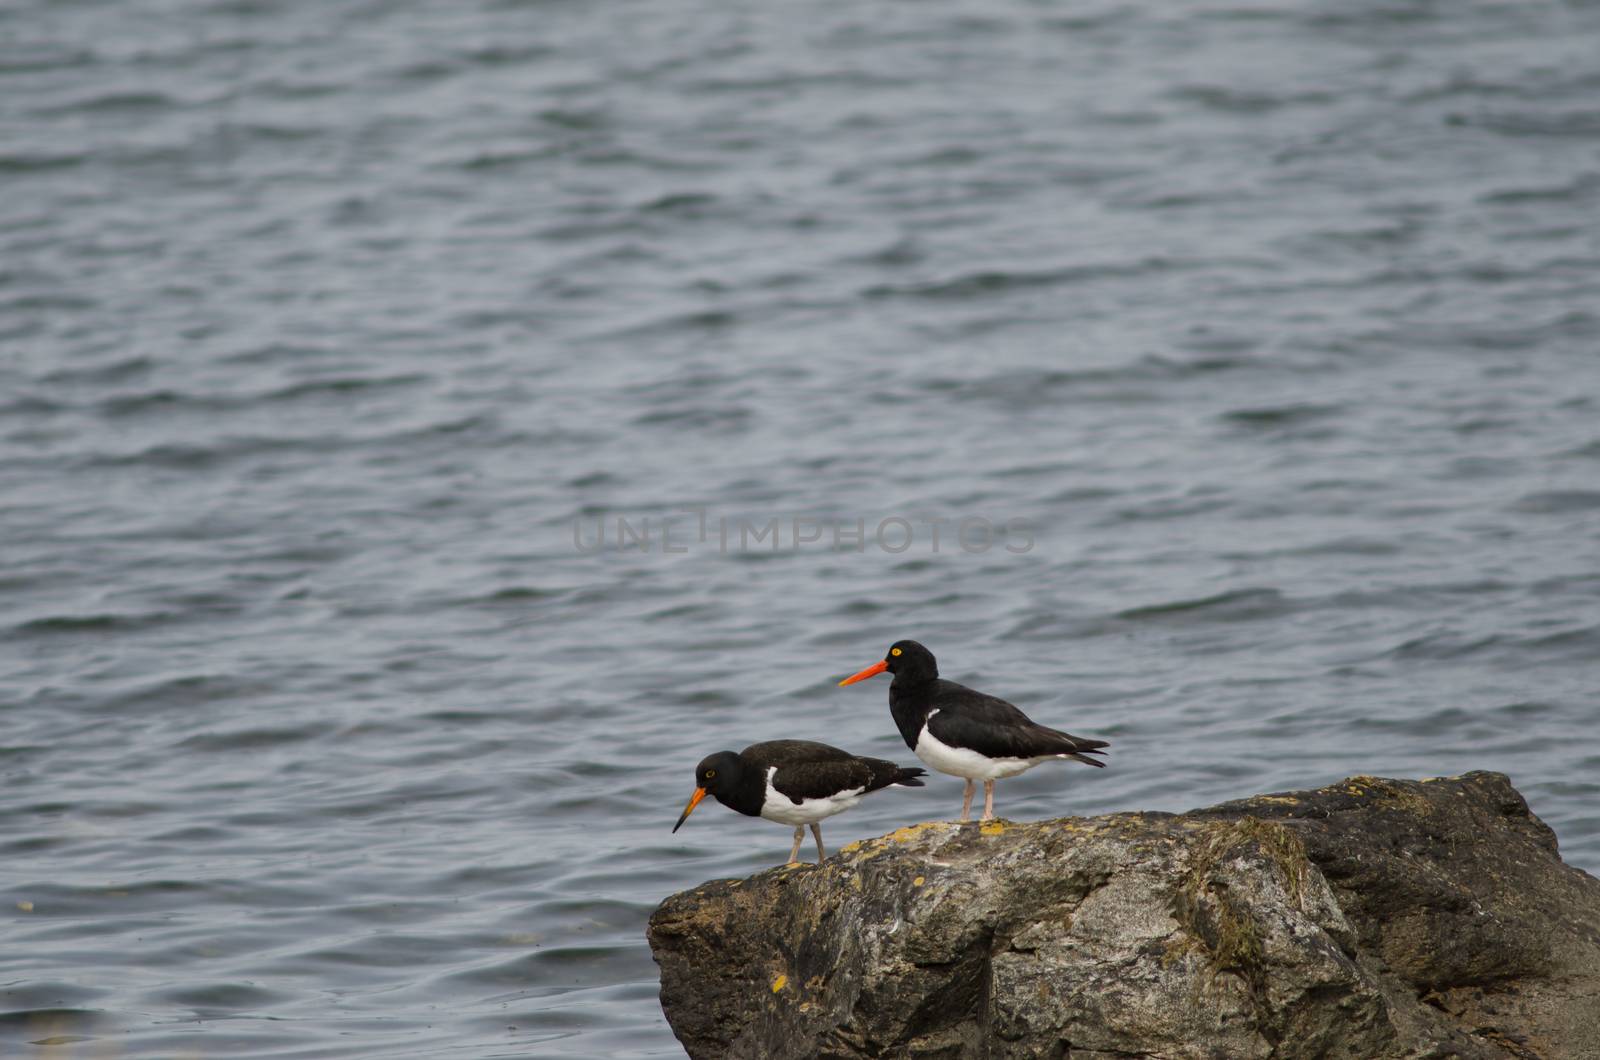 Magellanic oystercatchers Haematopus leucopodus on a rock. Adult to the right and juvenile to the left. Puerto Natales. Ultima Esperanza Province. Magallanes and Chilean Antarctic Region. Chile.